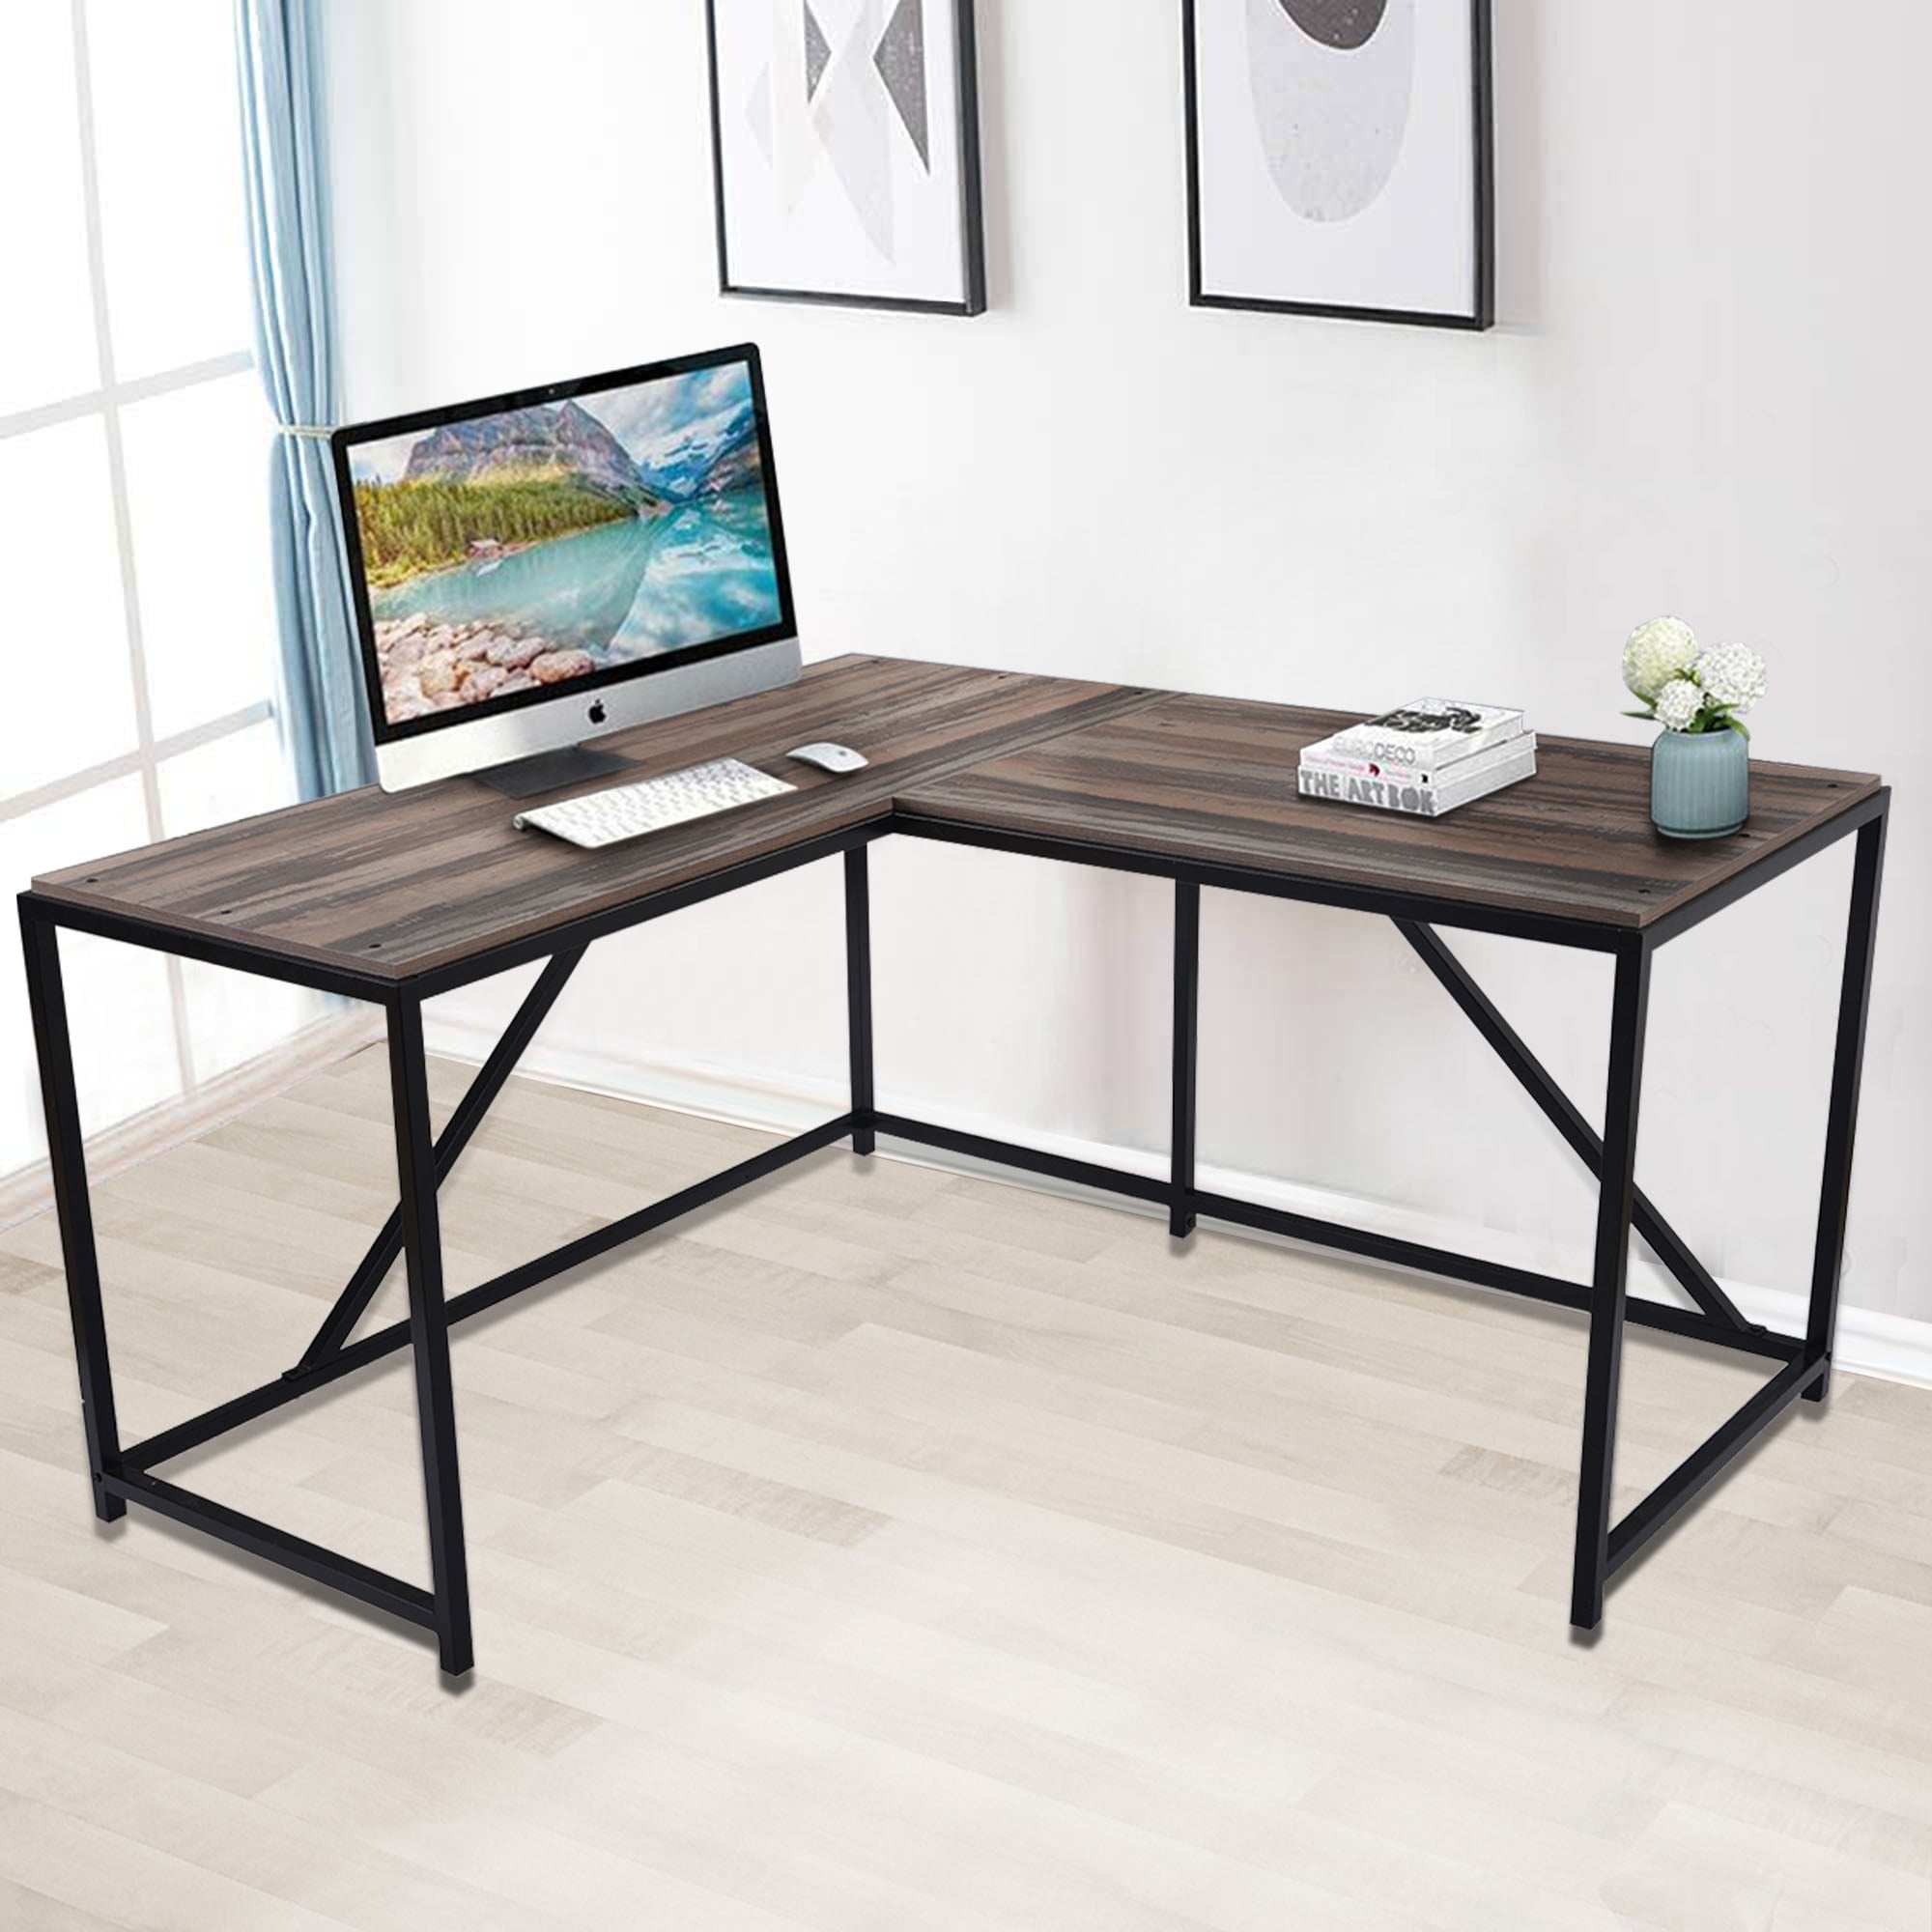 L-Shape Computer Table Study Desk Office Furniture PC Laptop Workstation Home AA 